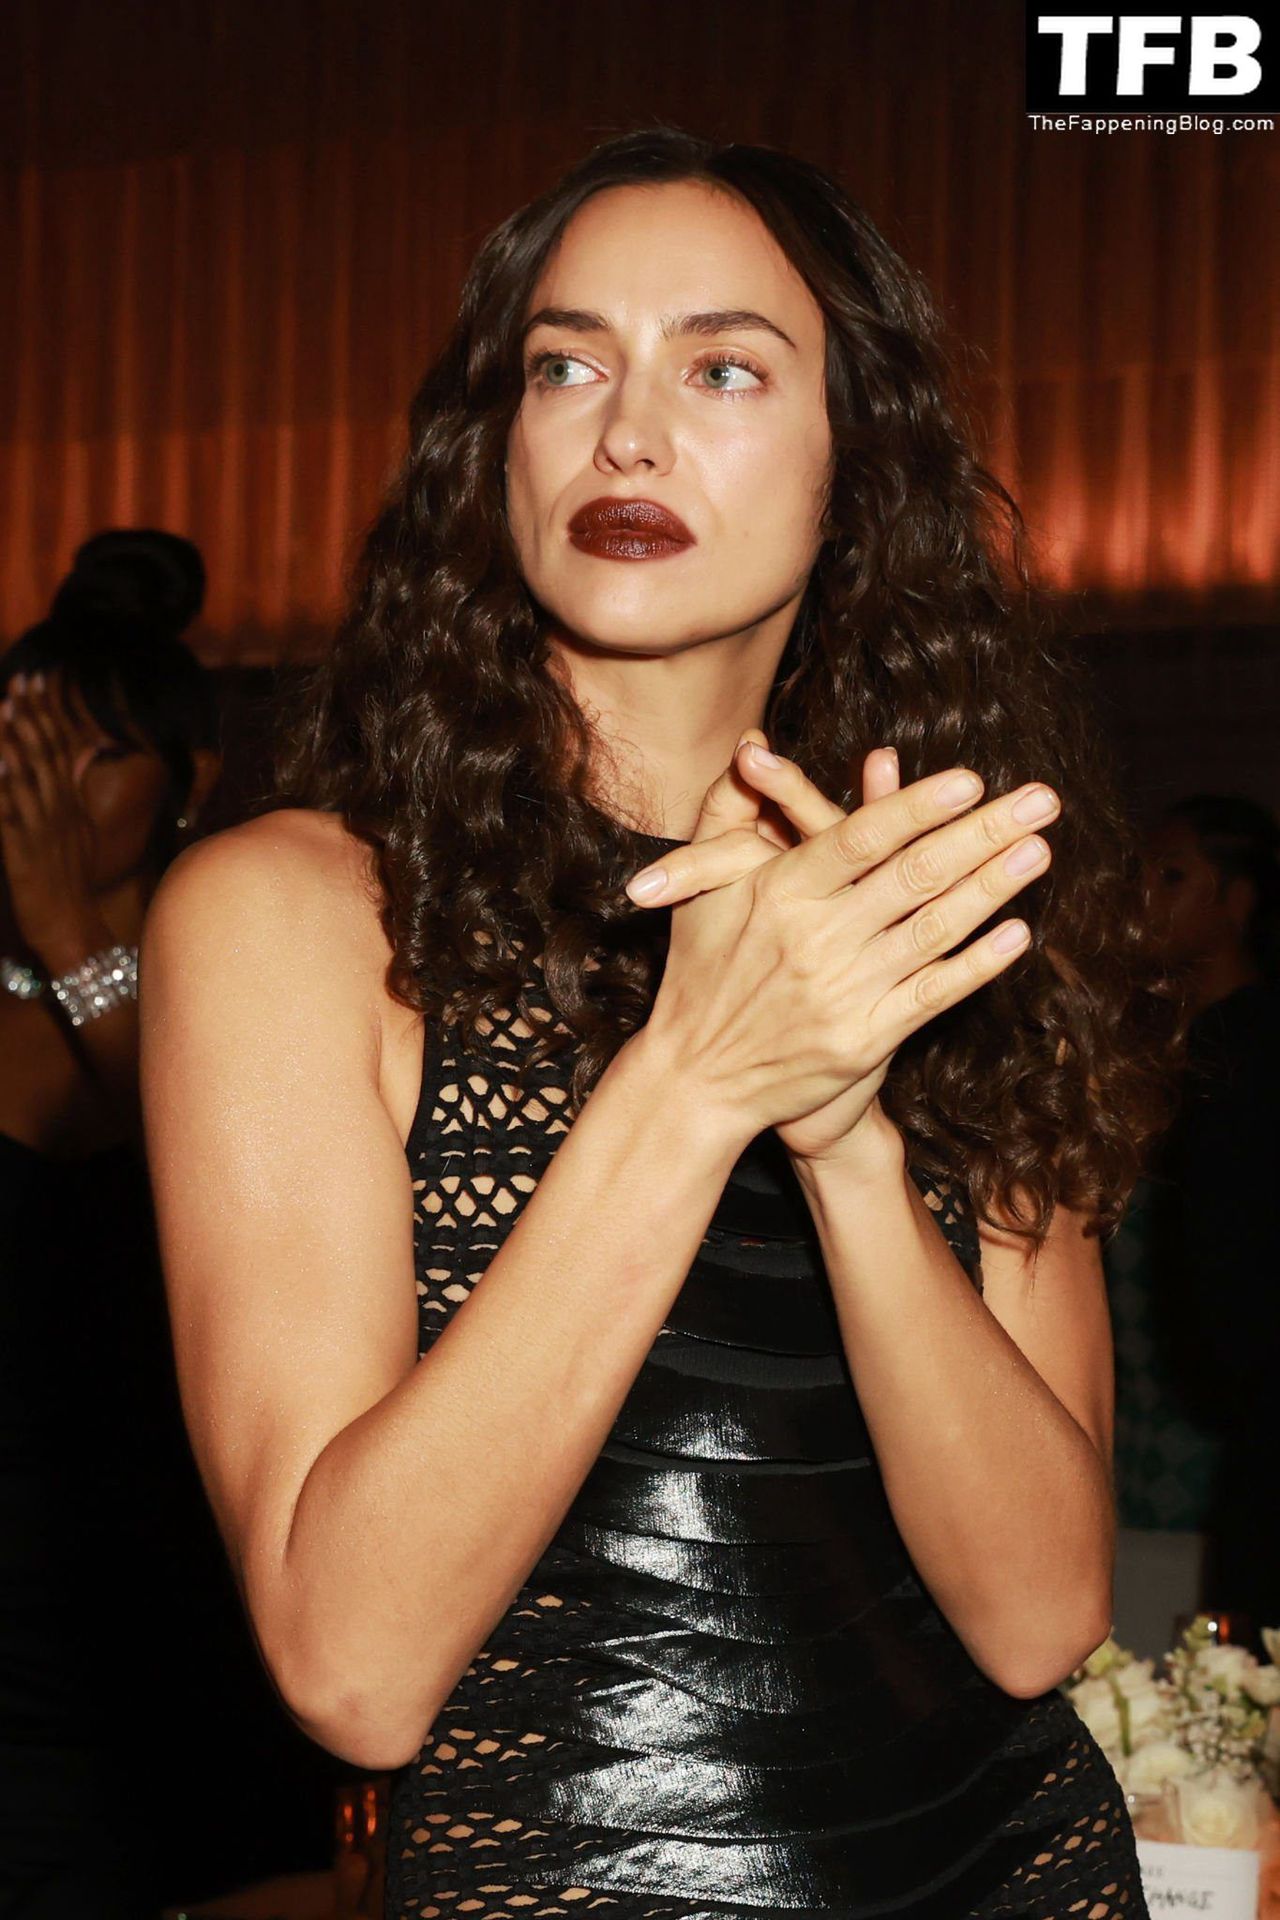 Irina Shayk Displays Her Model Figure at British Vogue’s “Forces For Change” Dinner in London (27 Photos)